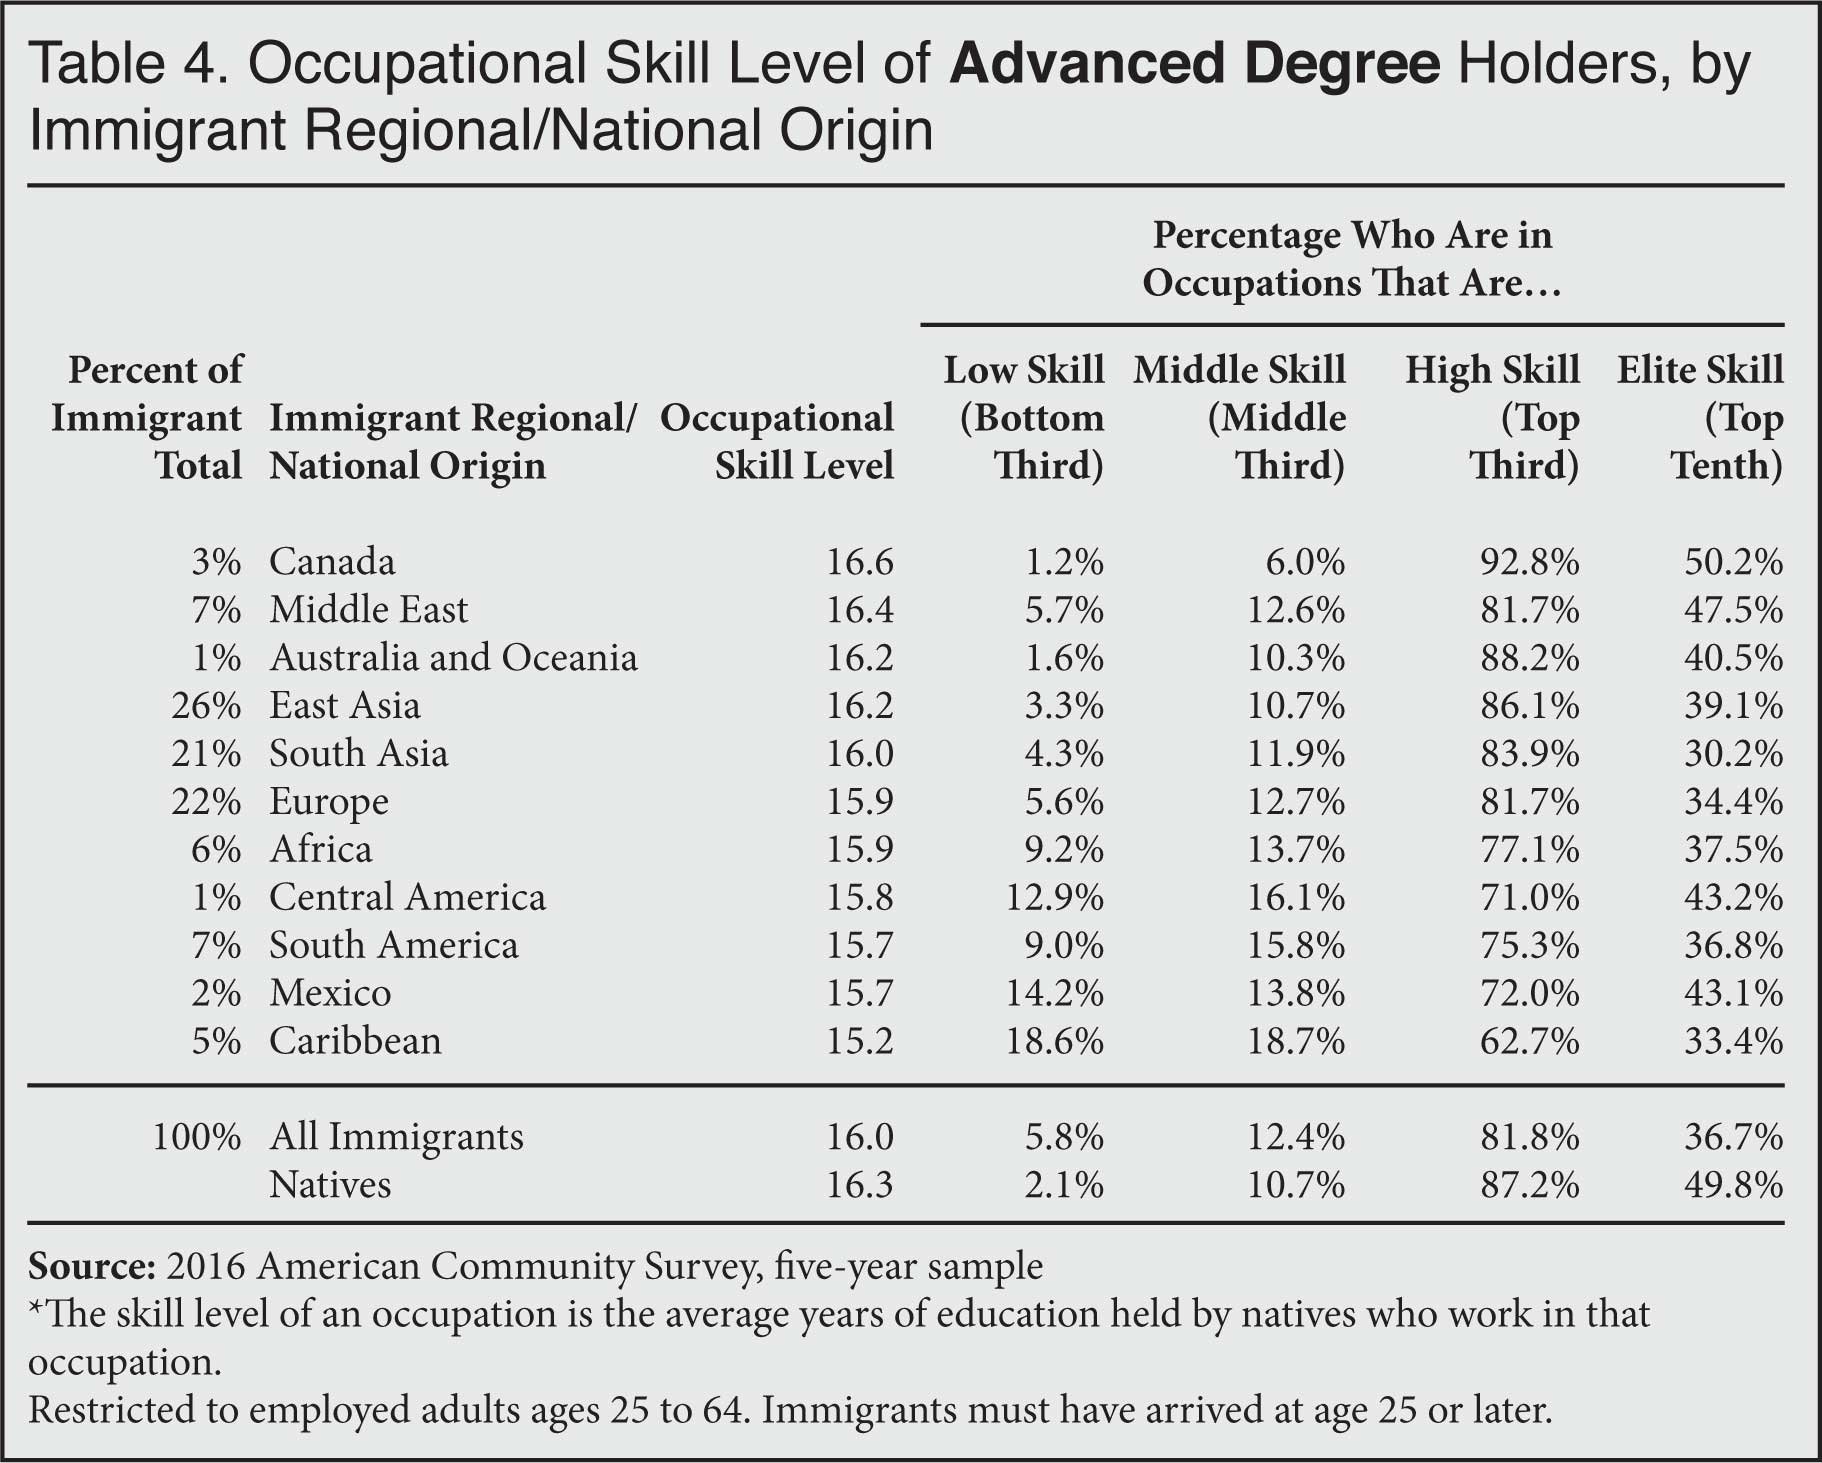 Table: Occupational Skill Level of Advanced Degree Holders, by Immigrant Regional/National Origin